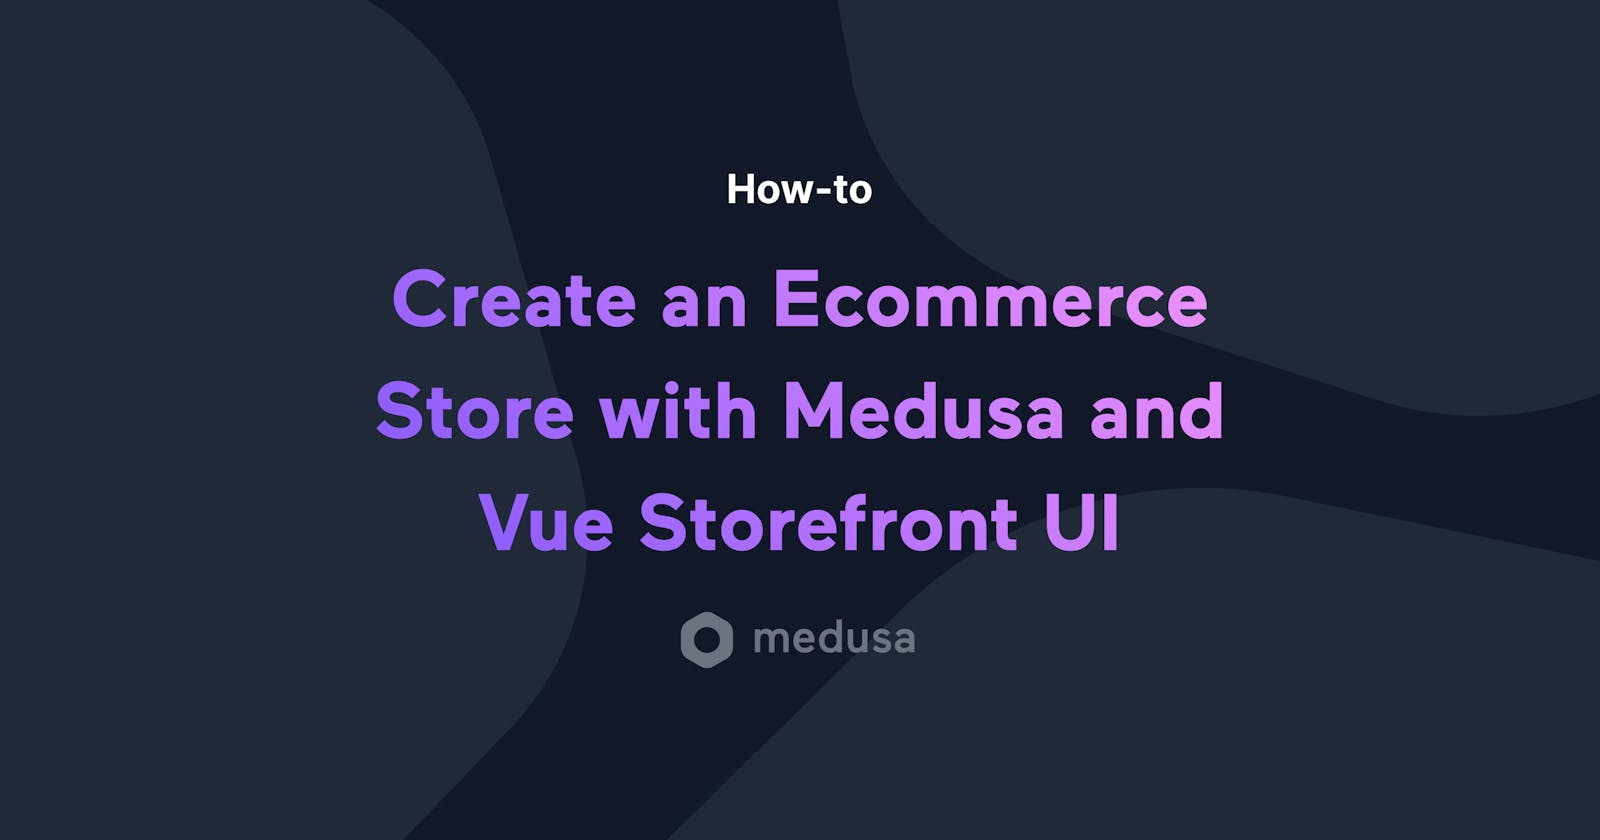 How I Created an Ecommerce Store with Vue Storefront UI and Medusa